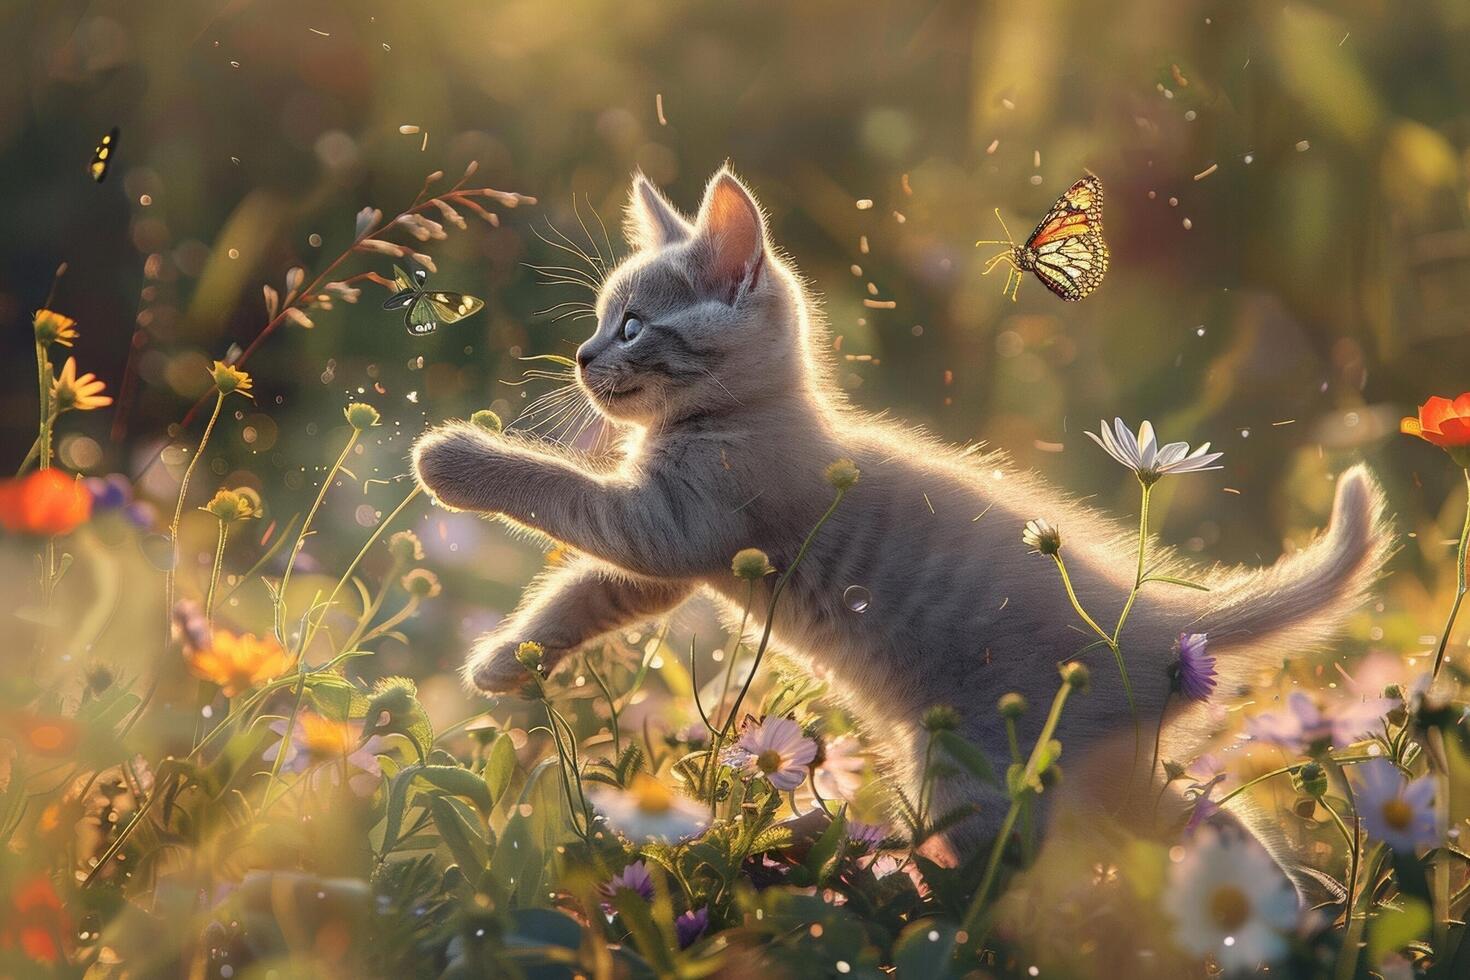 A playful Russian Blue kitten chasing a butterfly through a field of wildflowers, its sleek silver coat shining in the sunlight photo